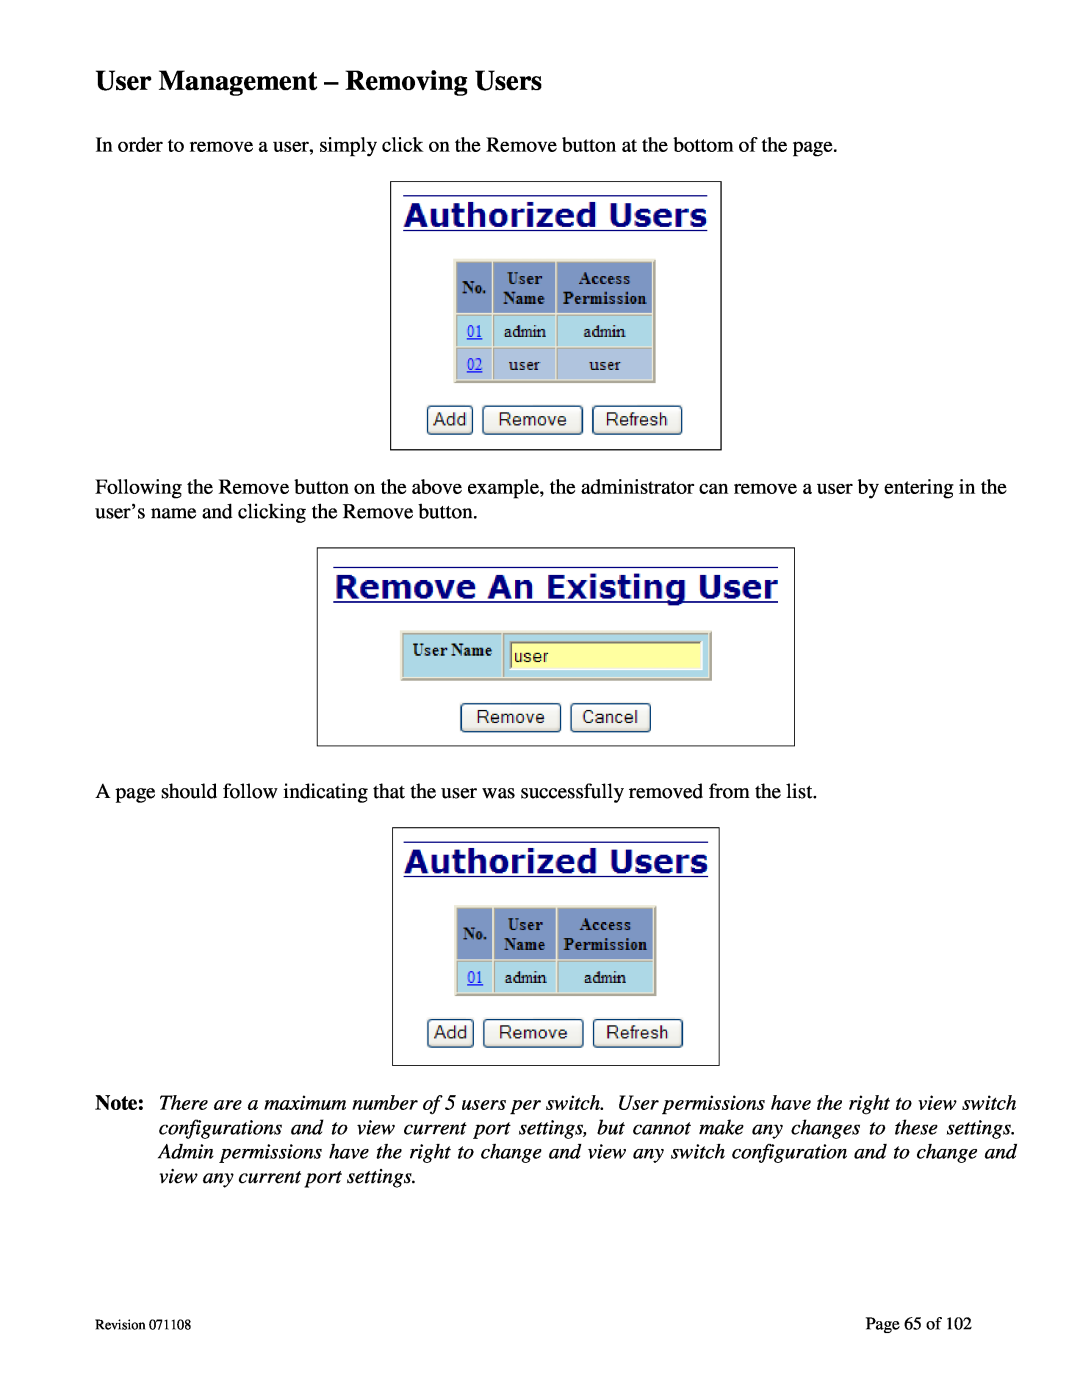 N-Tron 708M12 user manual User Management - Removing Users, Page 65 of 